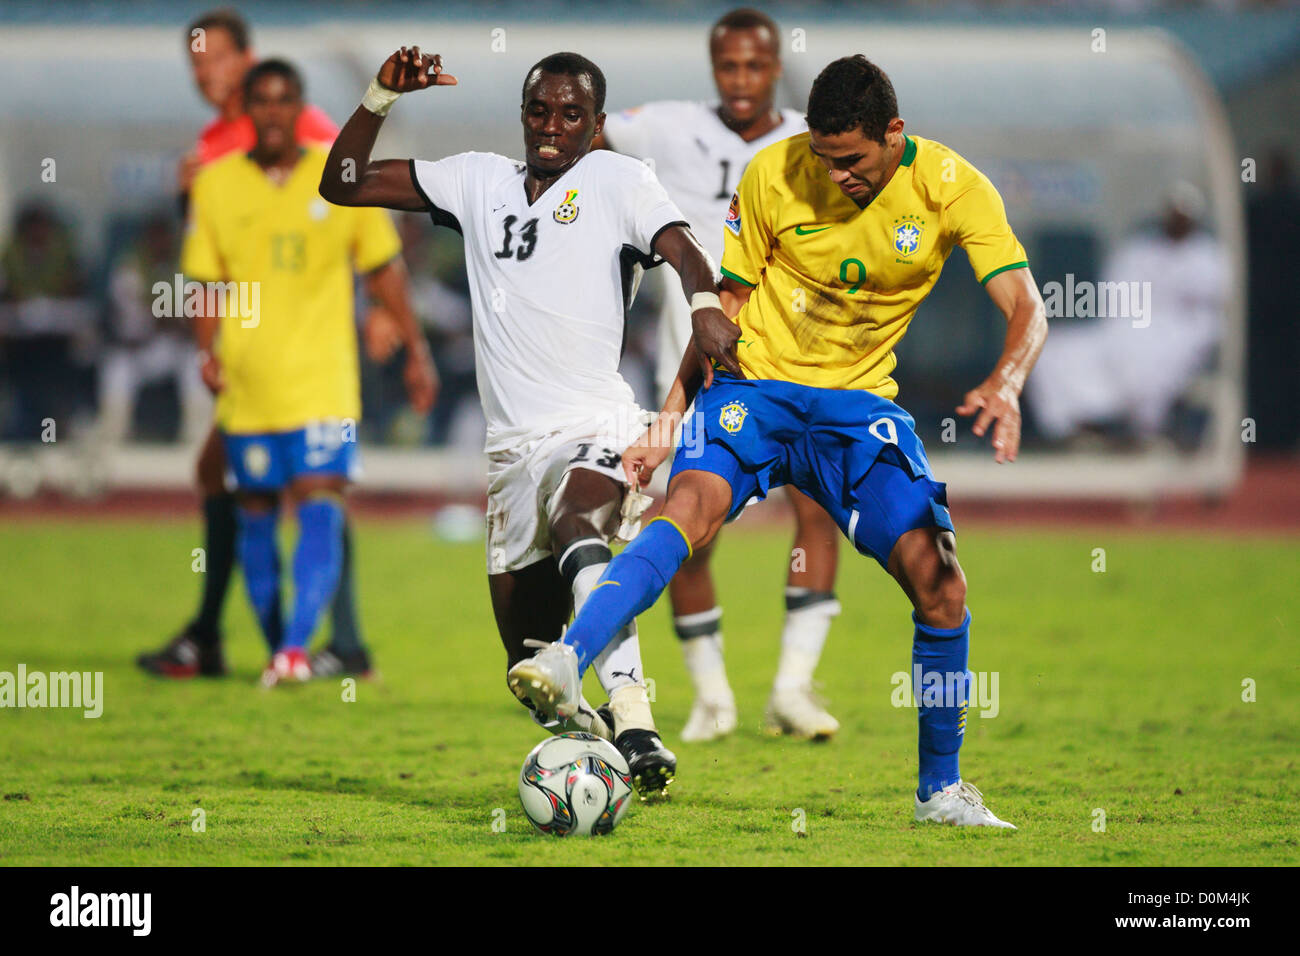 Mohammed Rabiu of Ghana (13) fights for the ball against Alan Kardec of Brazil (9) during the 2009 FIFA U-20 World Cup final. Stock Photo